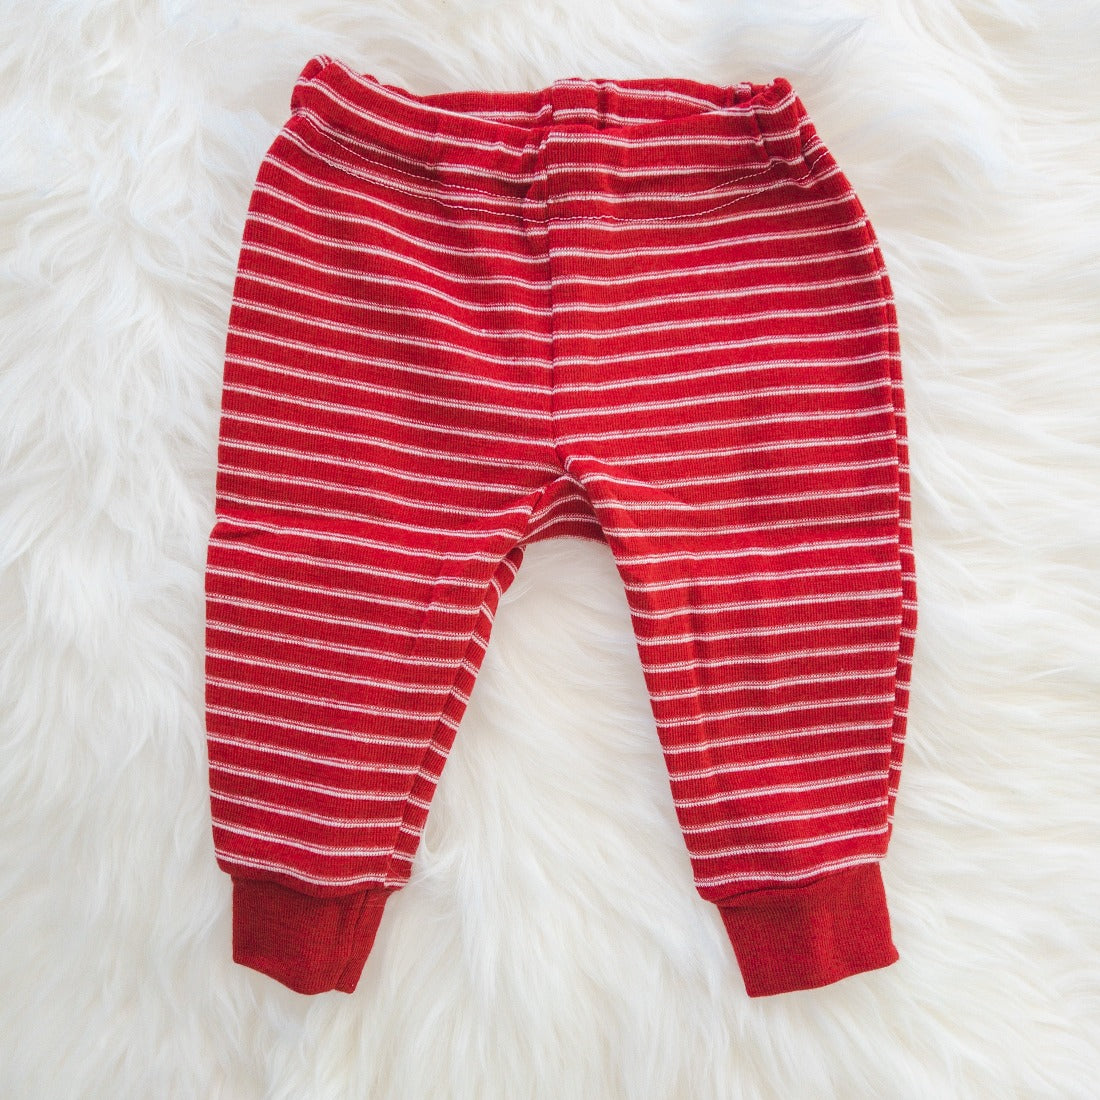 Baby and children's tights Merino wool stripes